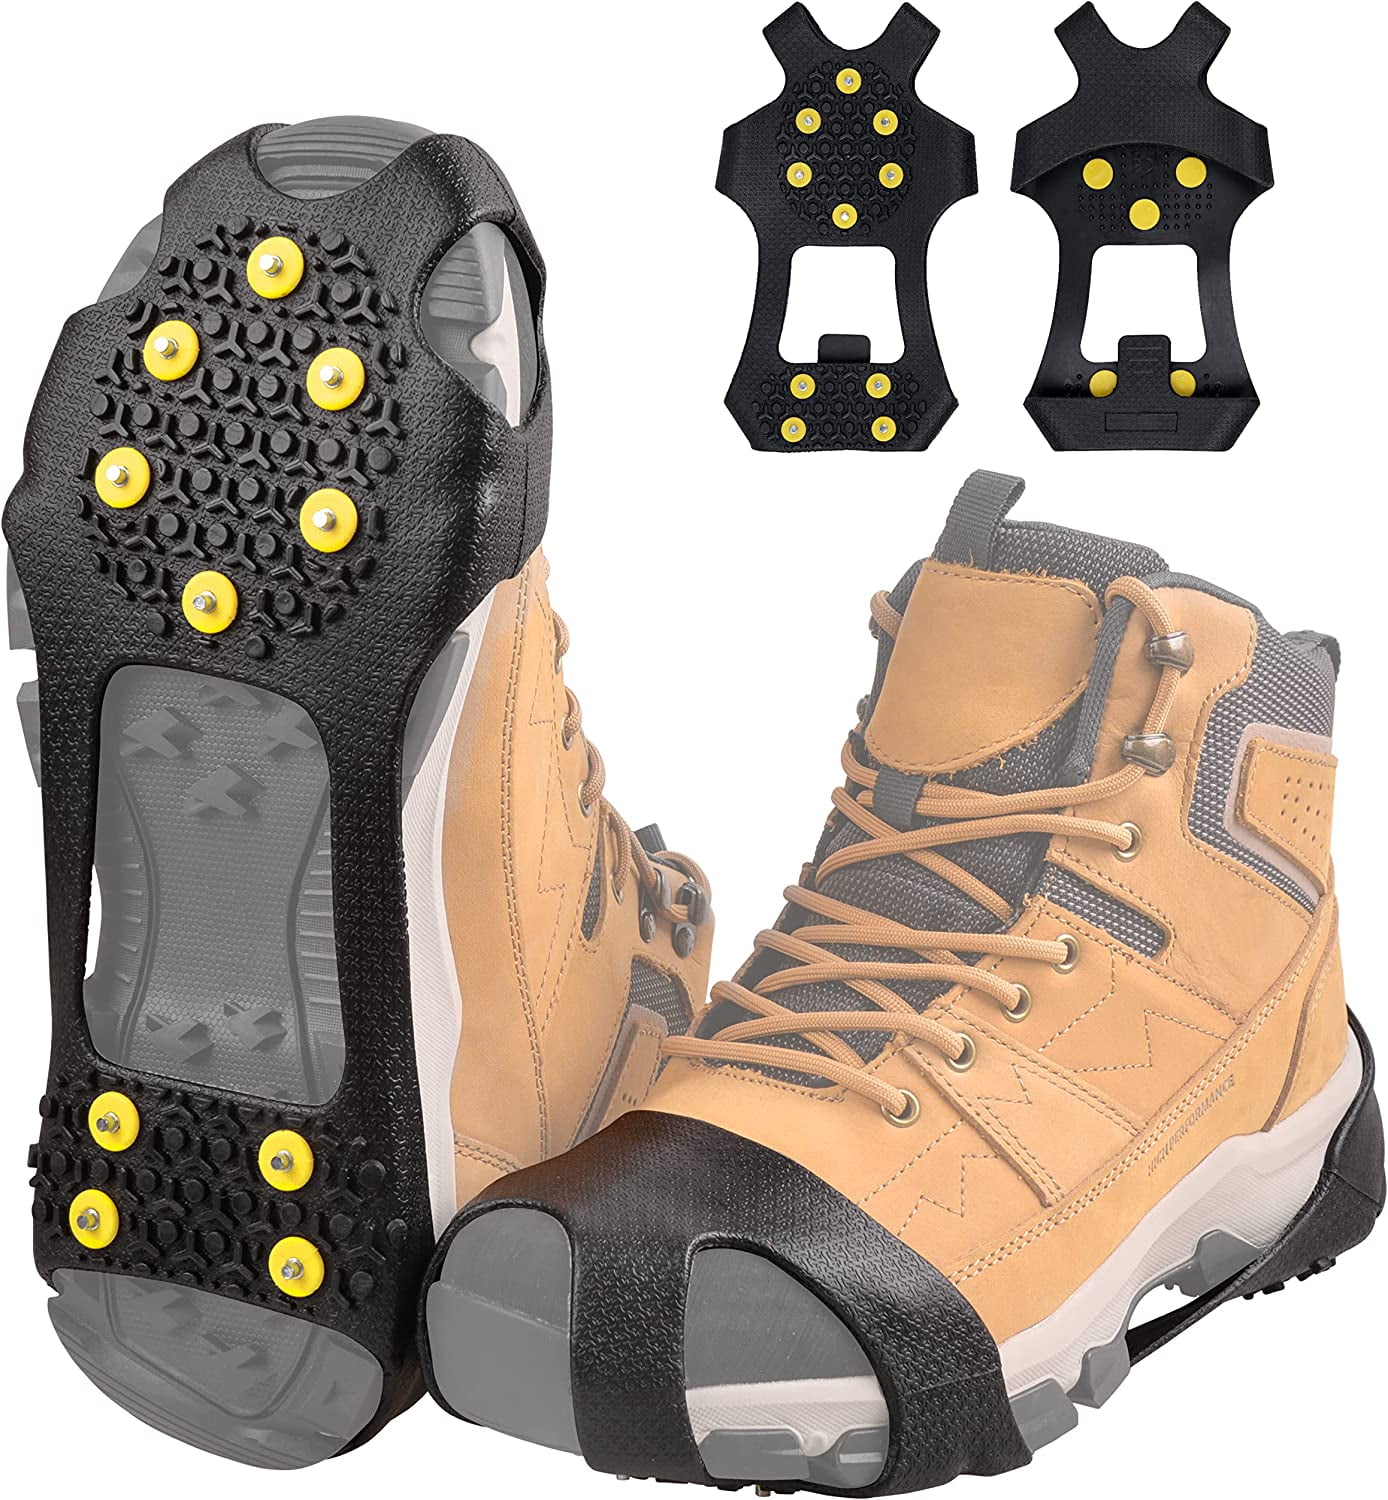 Ice Snow Cleats for Shoes Boots,Walk Traction Cleats Rubber Crampons Anti  Slip 10-Stud Winter Ice Cleat Slip-on Stretch Footwear for Women Men Kids 